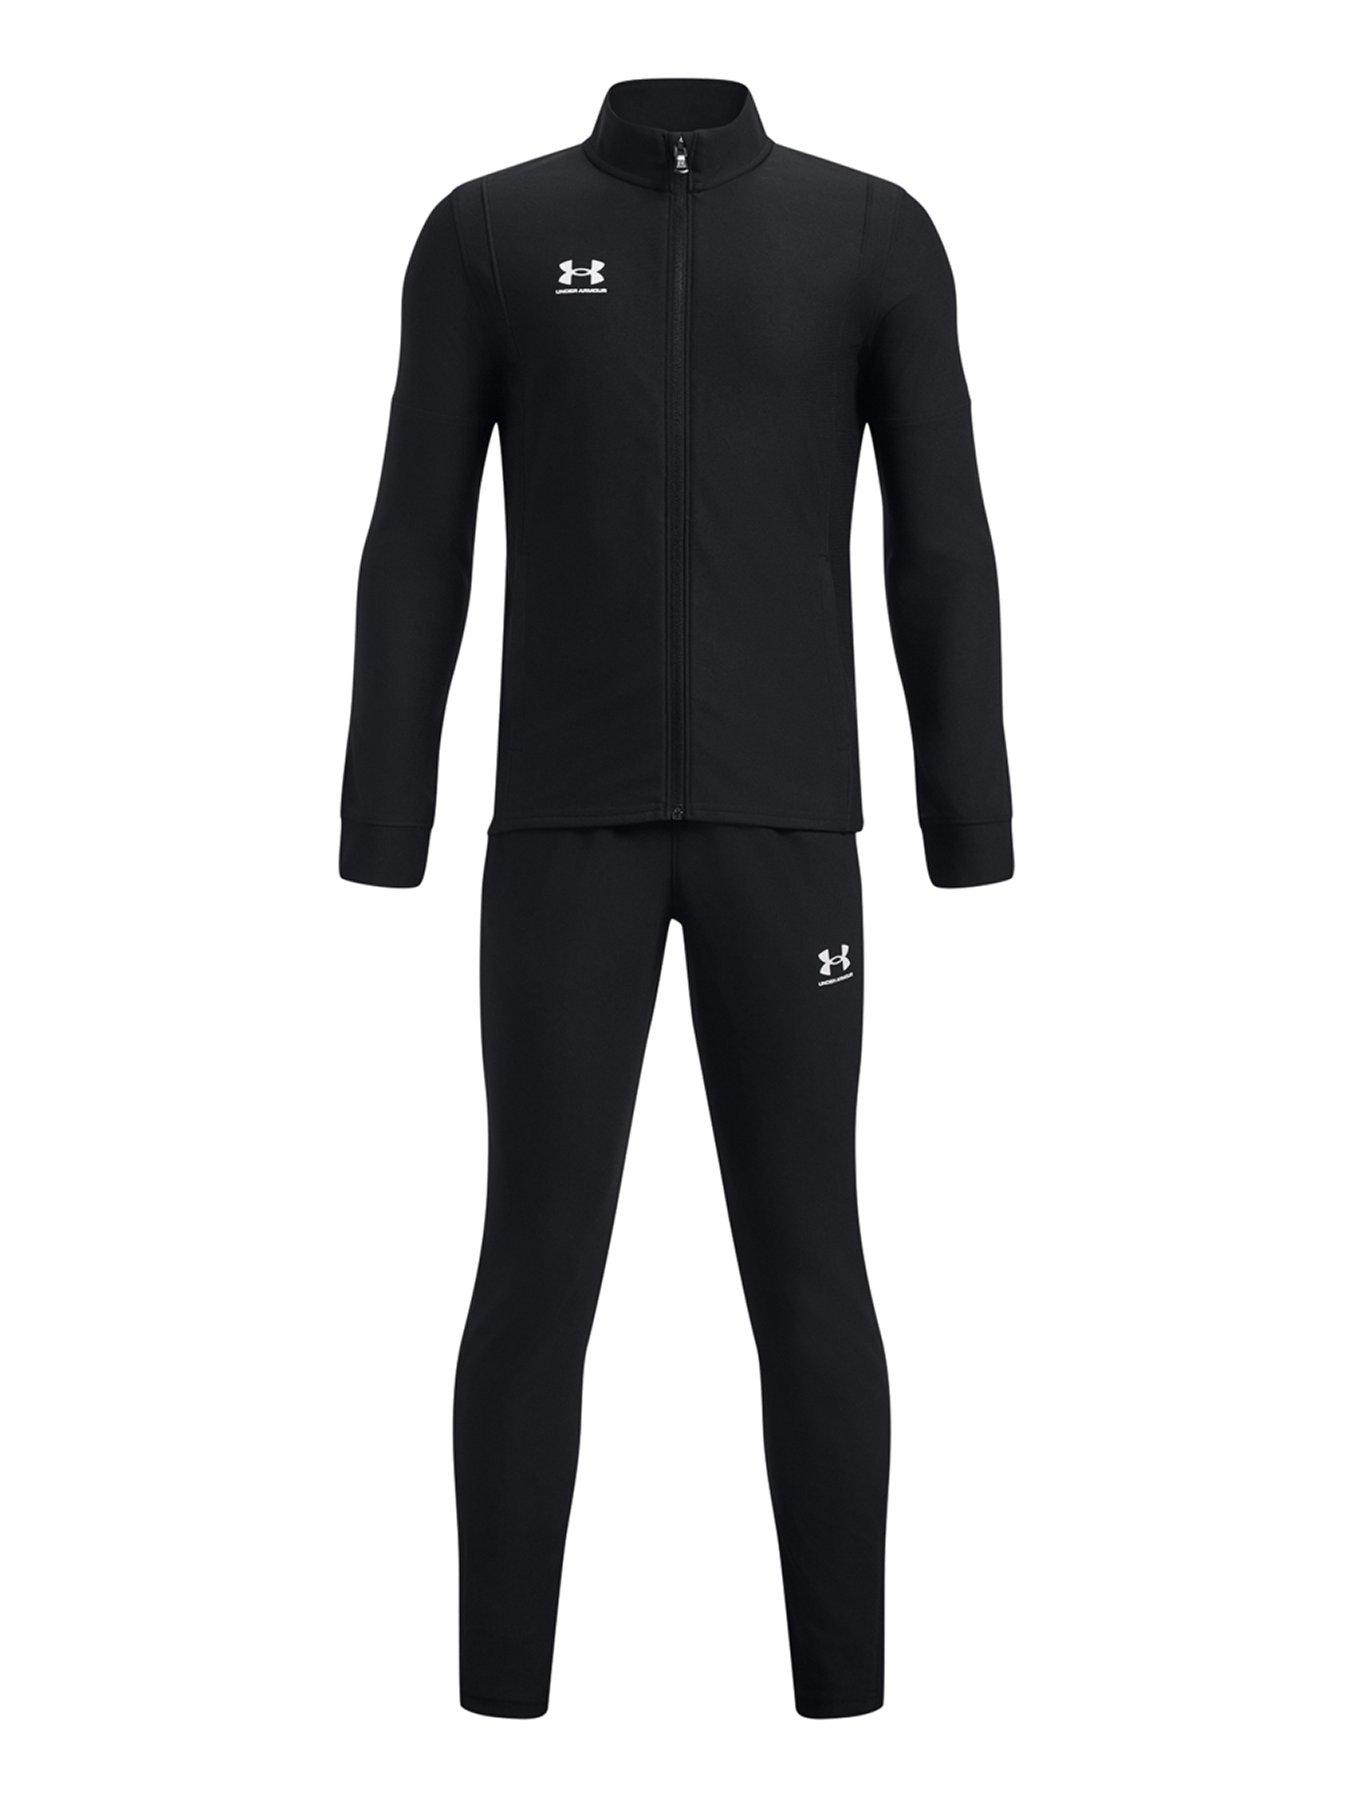 Under armour, Kids & baby sports clothing, Sports & leisure